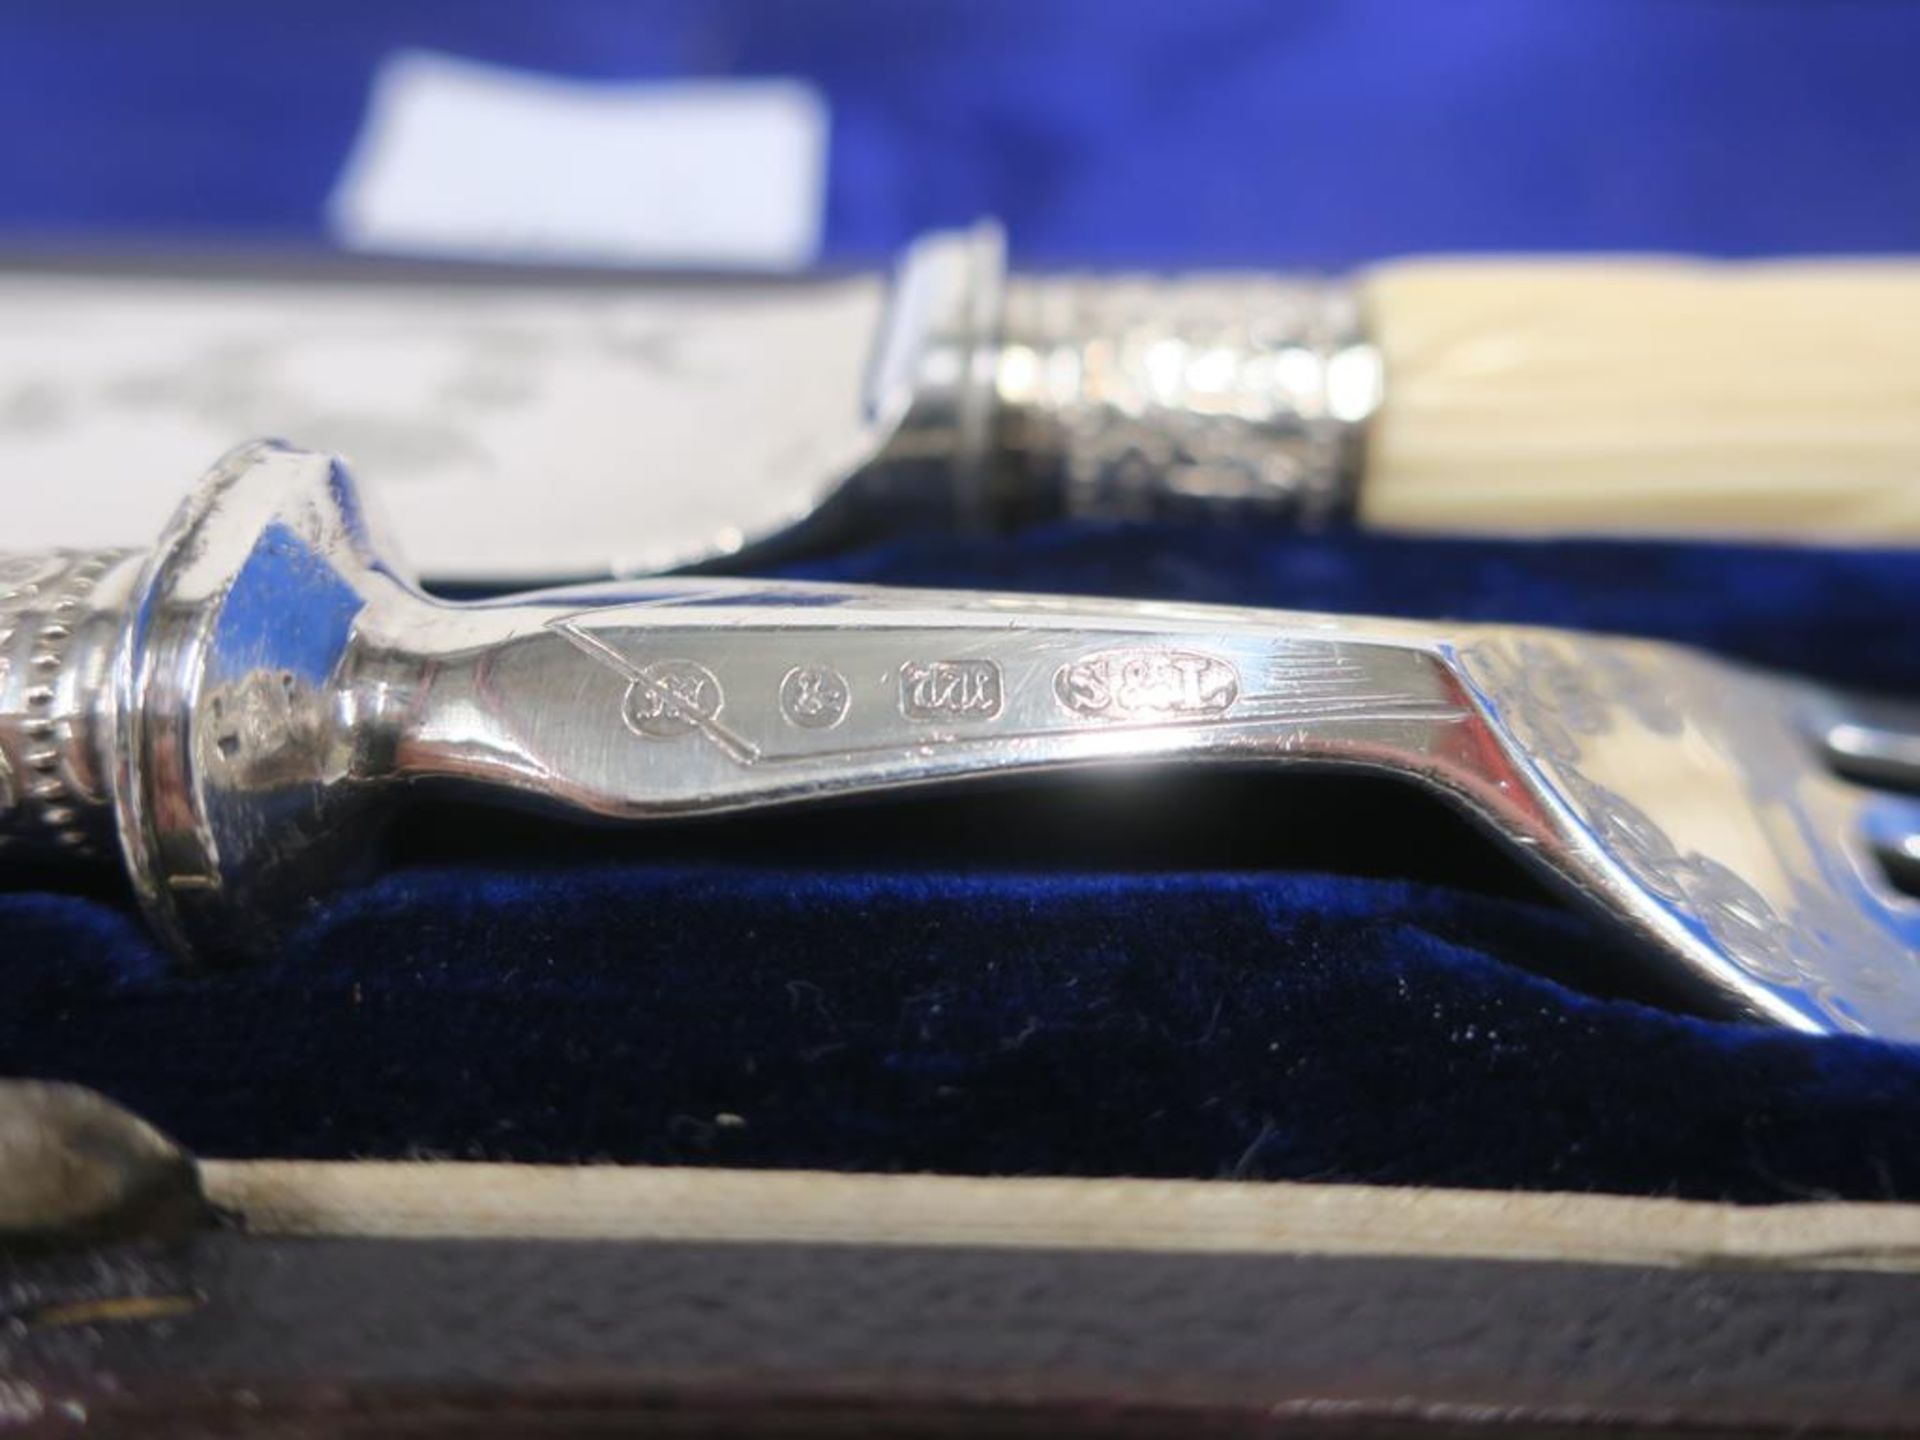 A Victorian Silver Plated Carved Bone Handled Carving Set (pair) in fitted case c 1880 (est £30-£ - Image 2 of 3